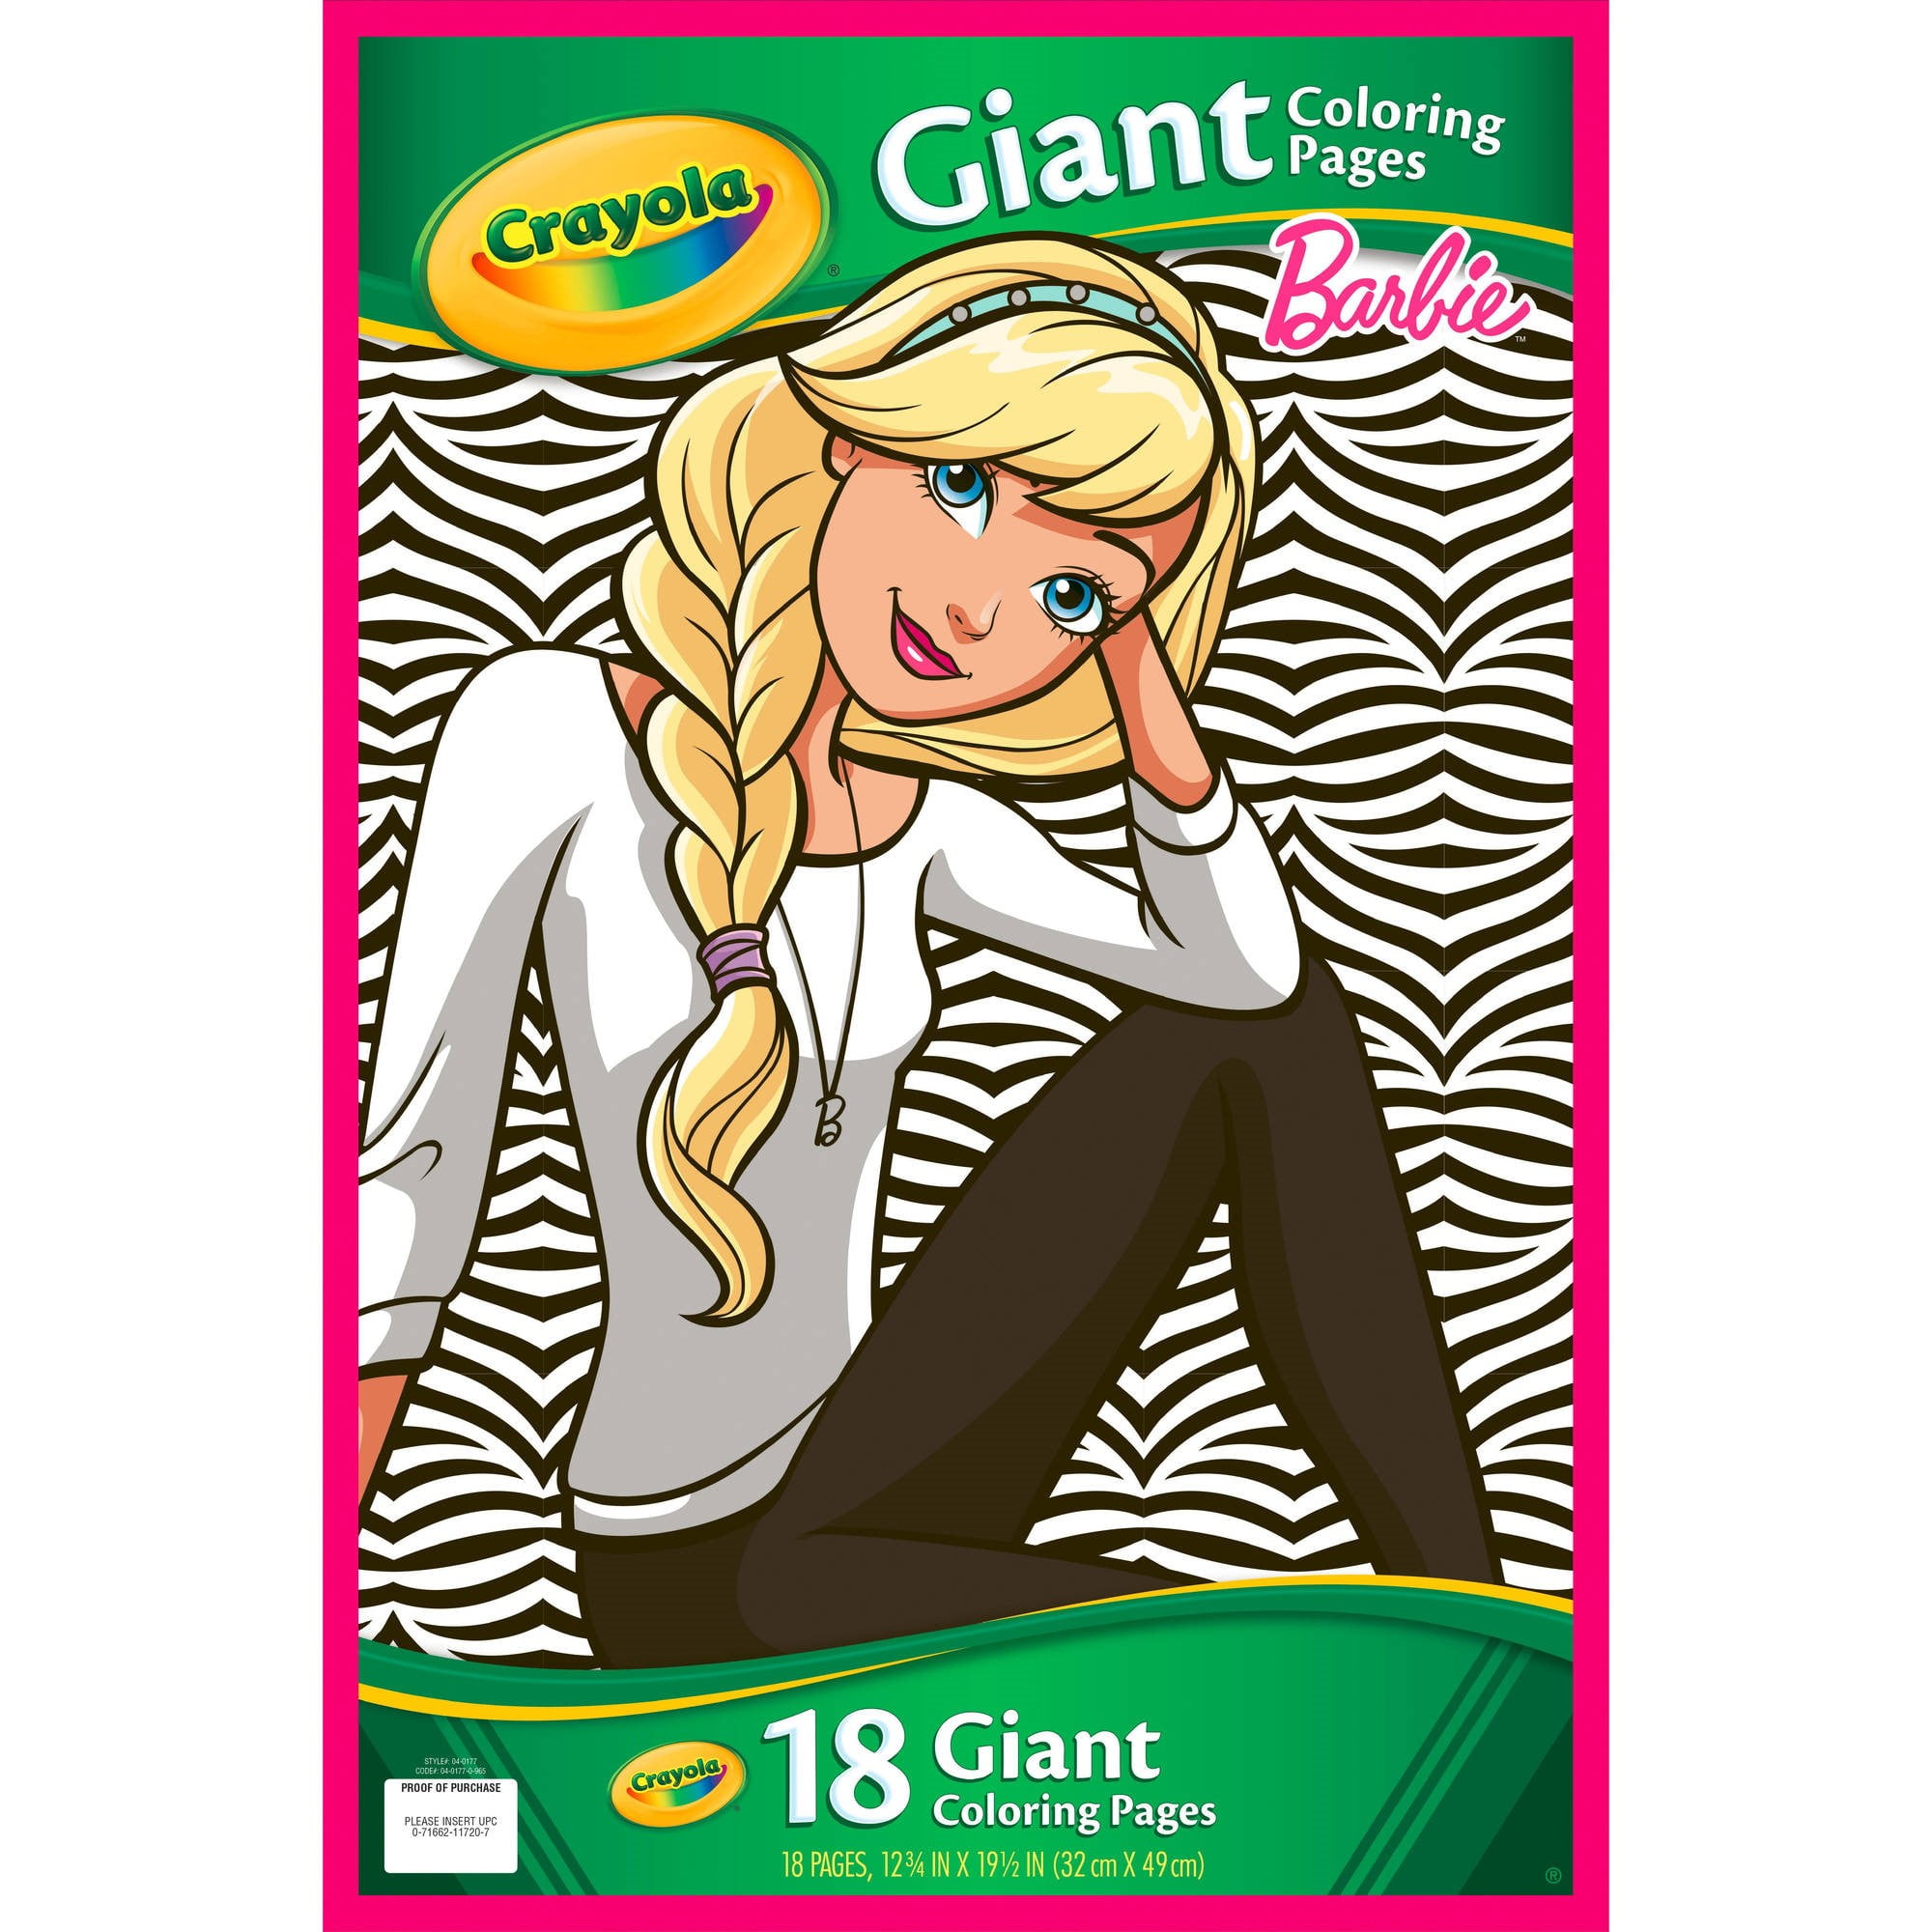 Crayola Giant Coloring Pages, Barbie, 18 Count